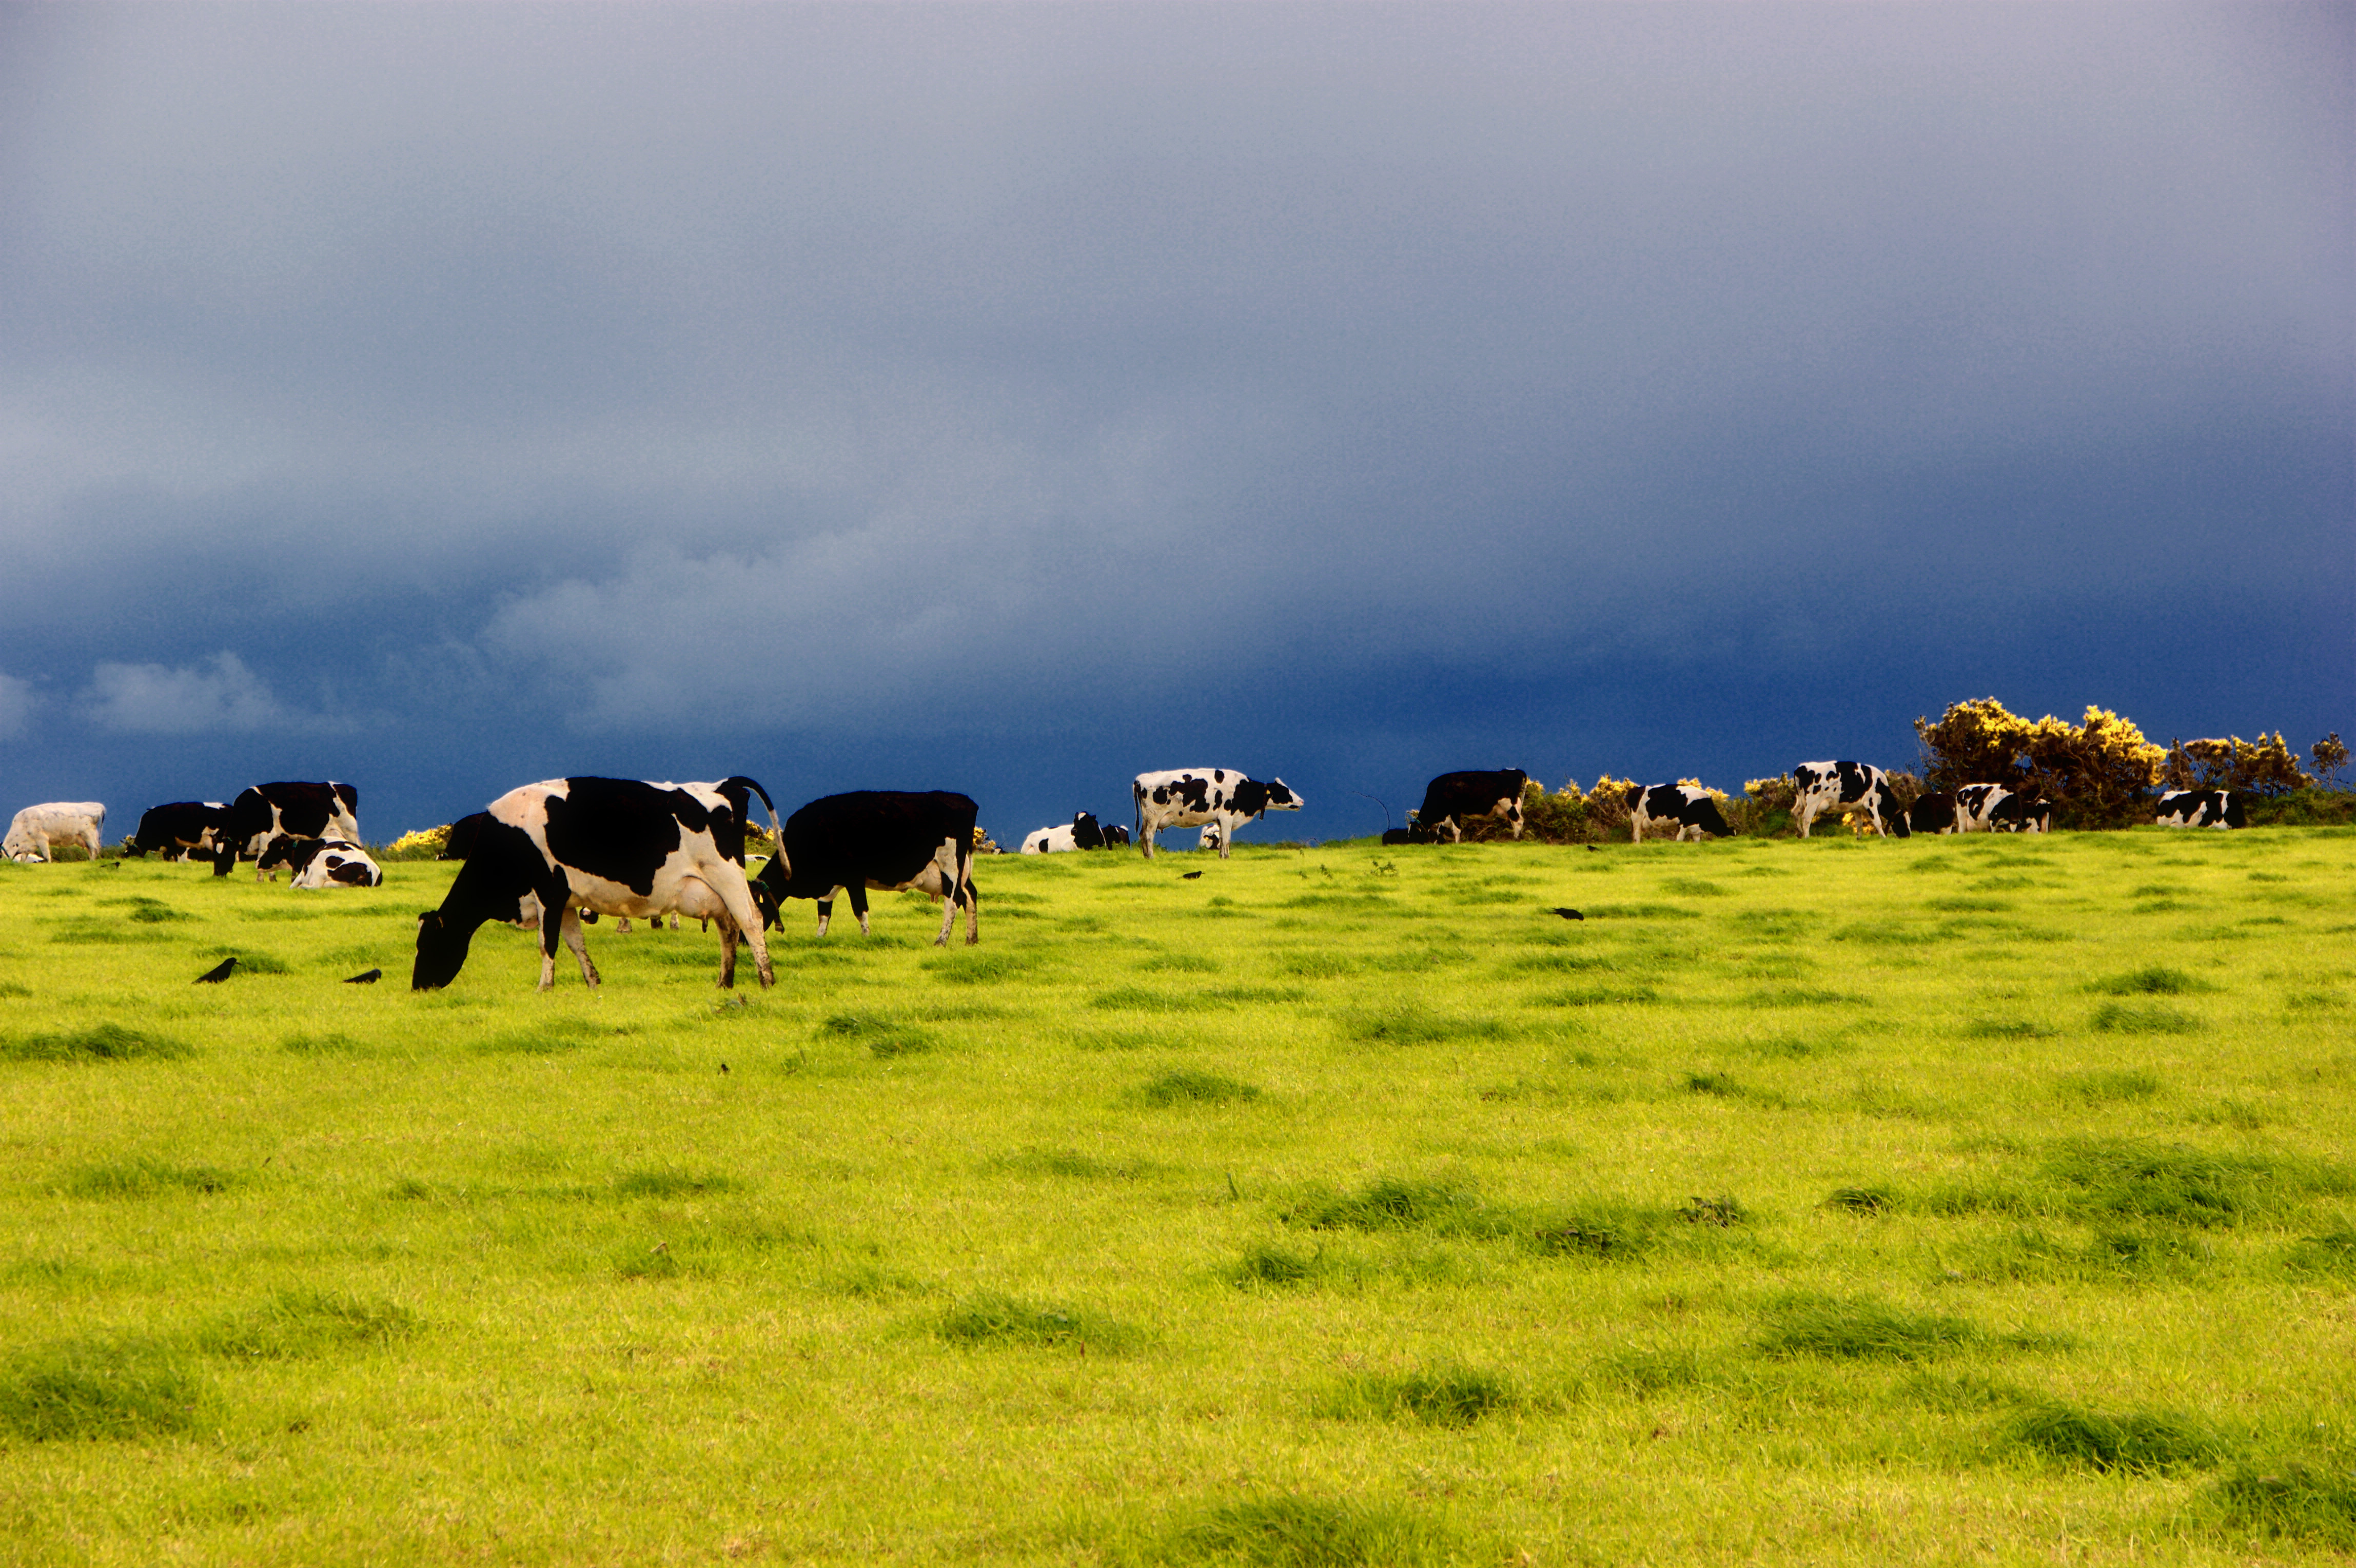 File:Dairy cows on pasture in Ireland.jpg - Wikimedia Commons